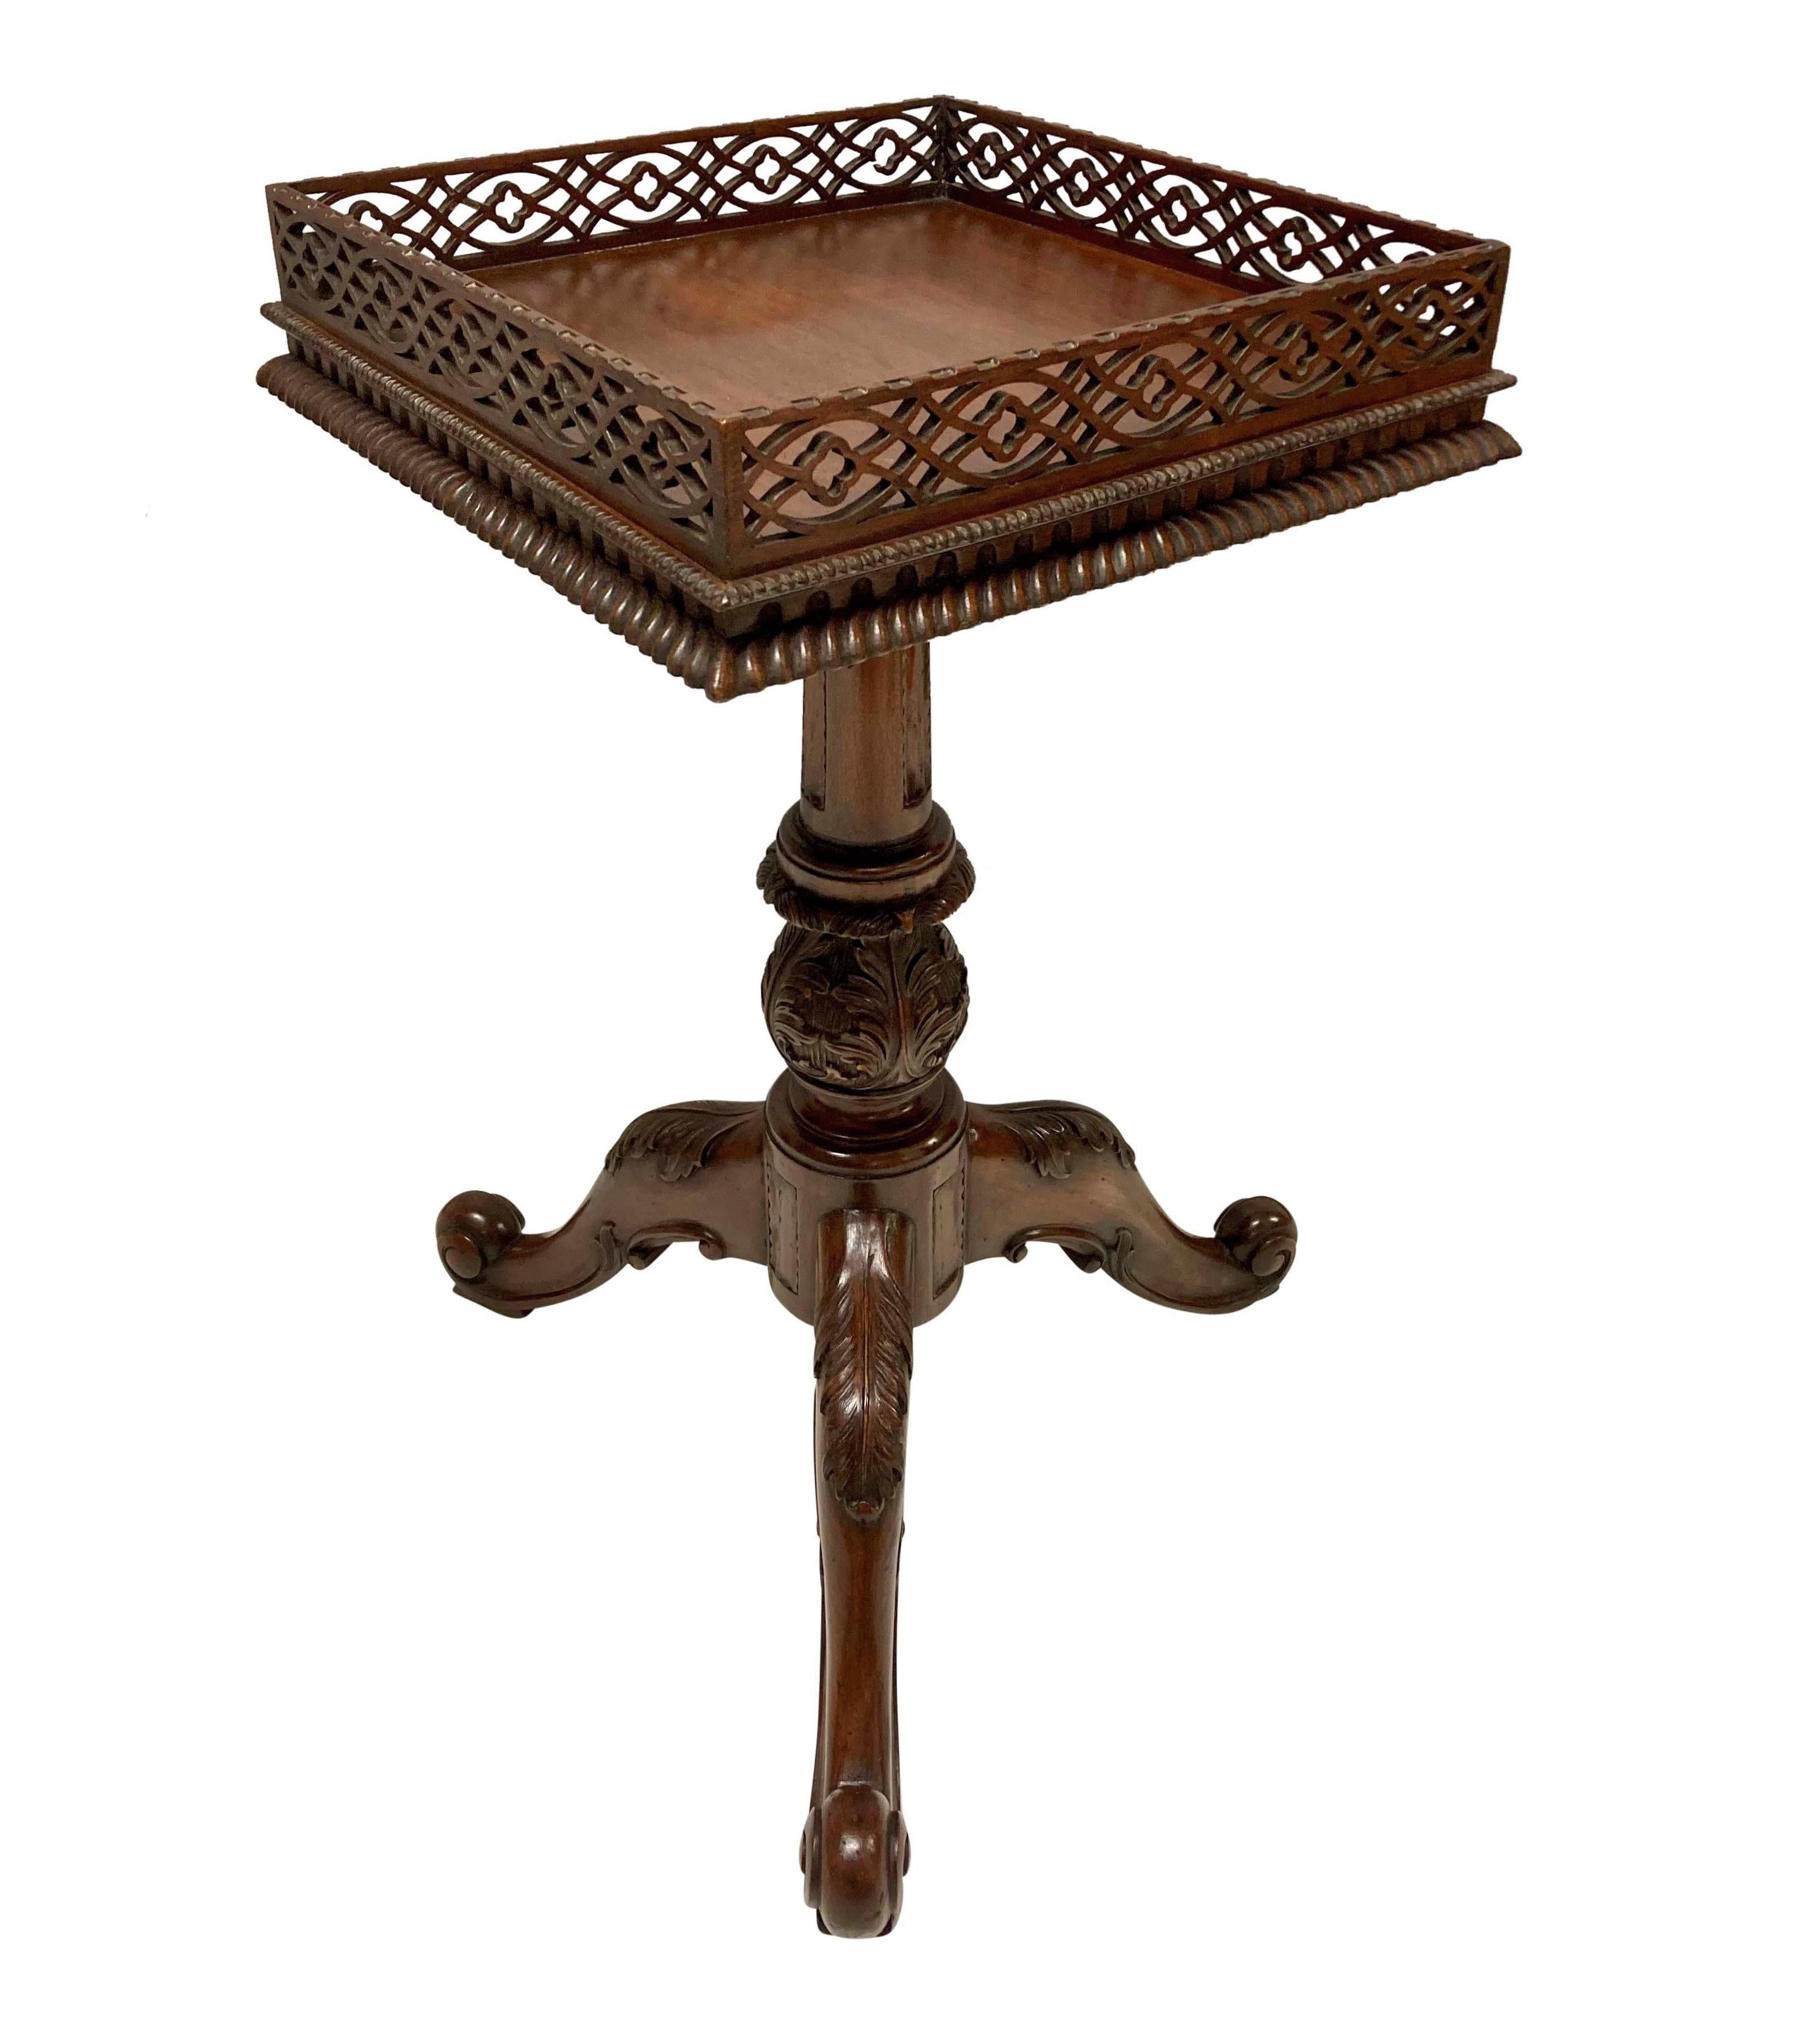 A fine pair of Chippendale style carved mahogany wine tables, on carved cabriole tripod bases with fretwork galleried tops.